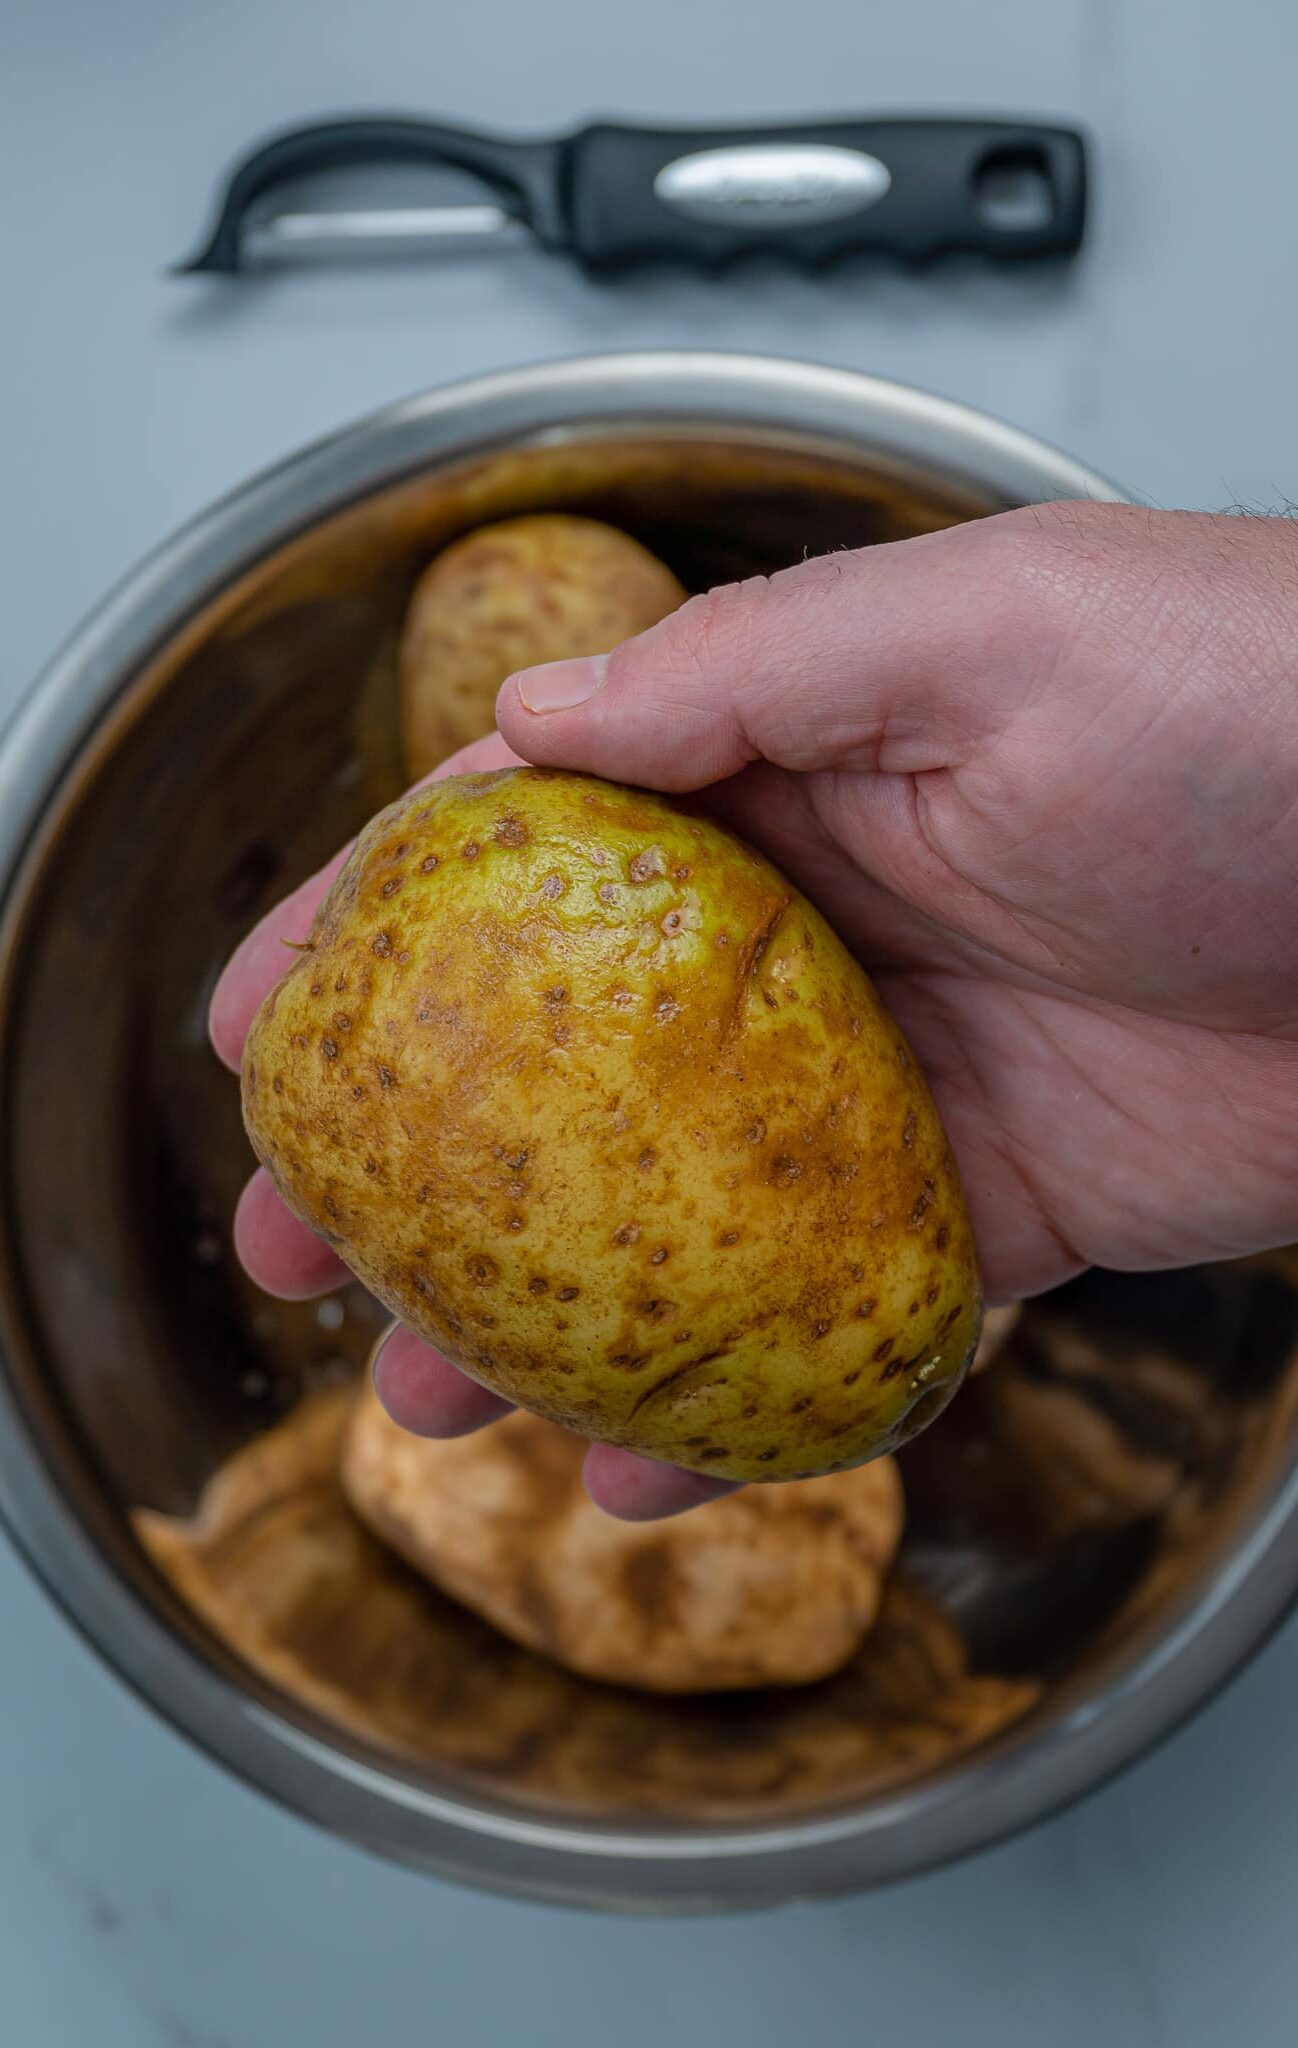 holding a russet potato over a bowl